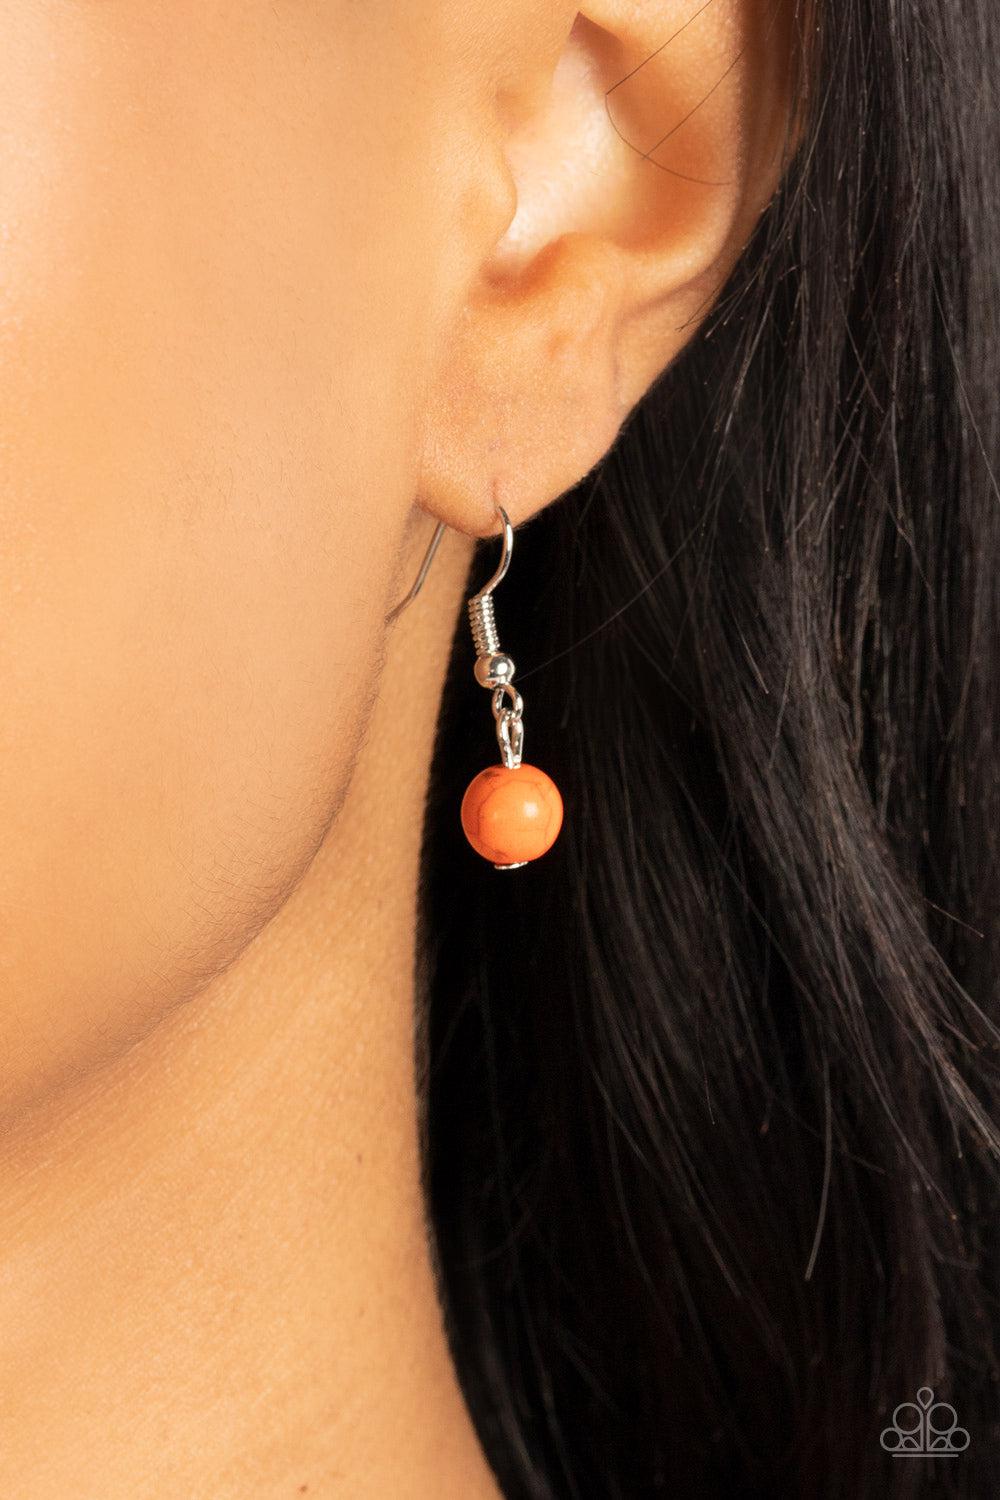 Hidden Dune Orange Stone Necklace - Paparazzi Accessories - free matching earrings - CarasShop.com - $5 Jewelry by Cara Jewels